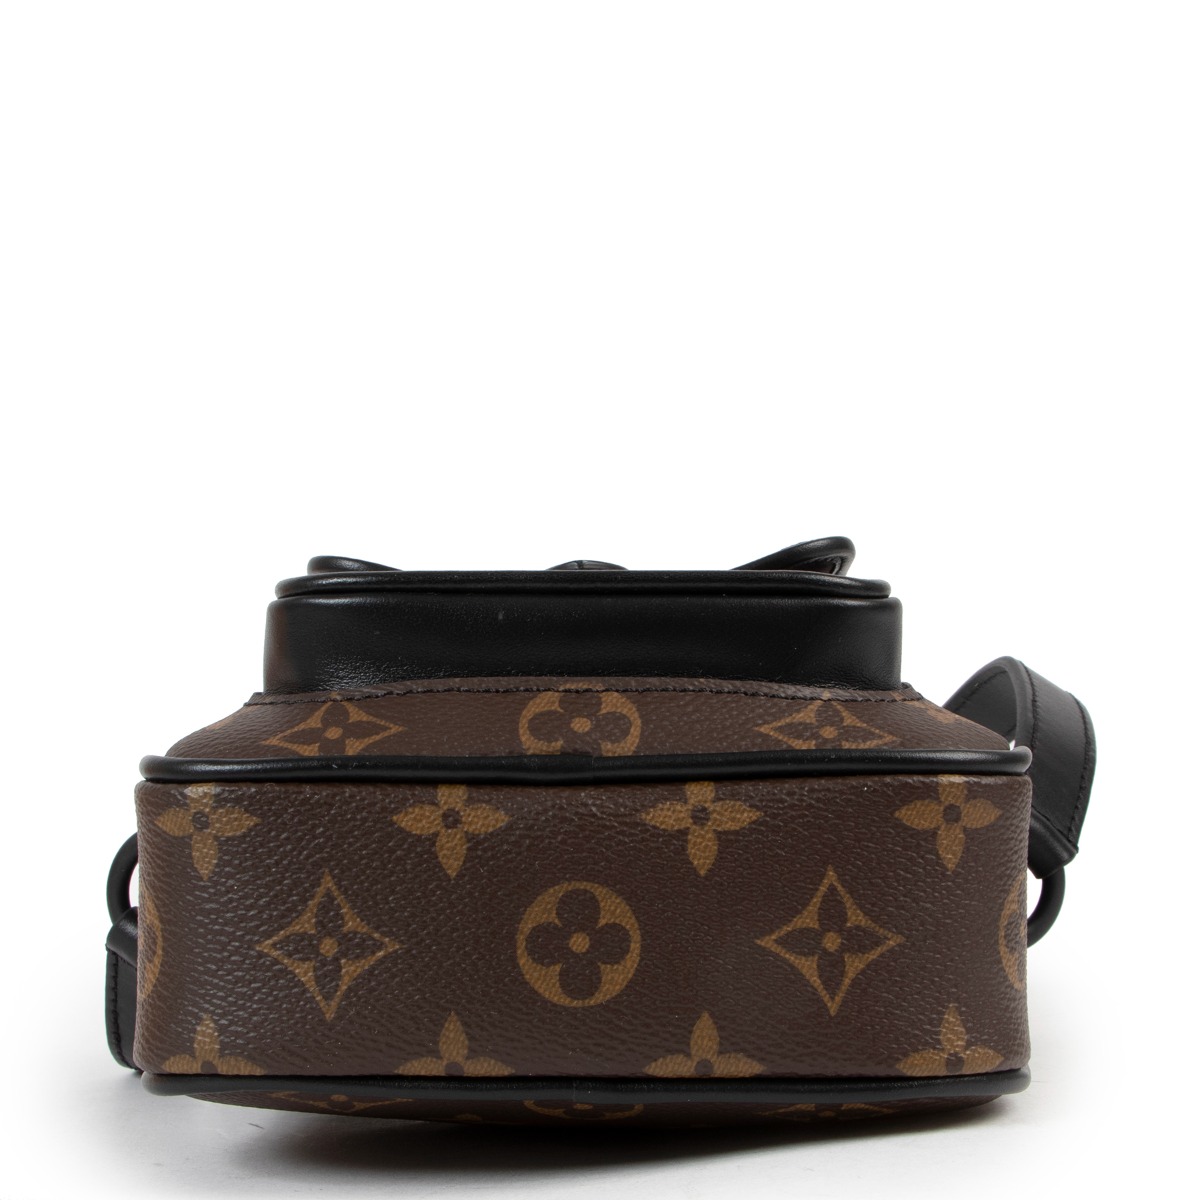 Shop Louis Vuitton MONOGRAM Christopher wearable wallet (M69404) by パリの凱旋門